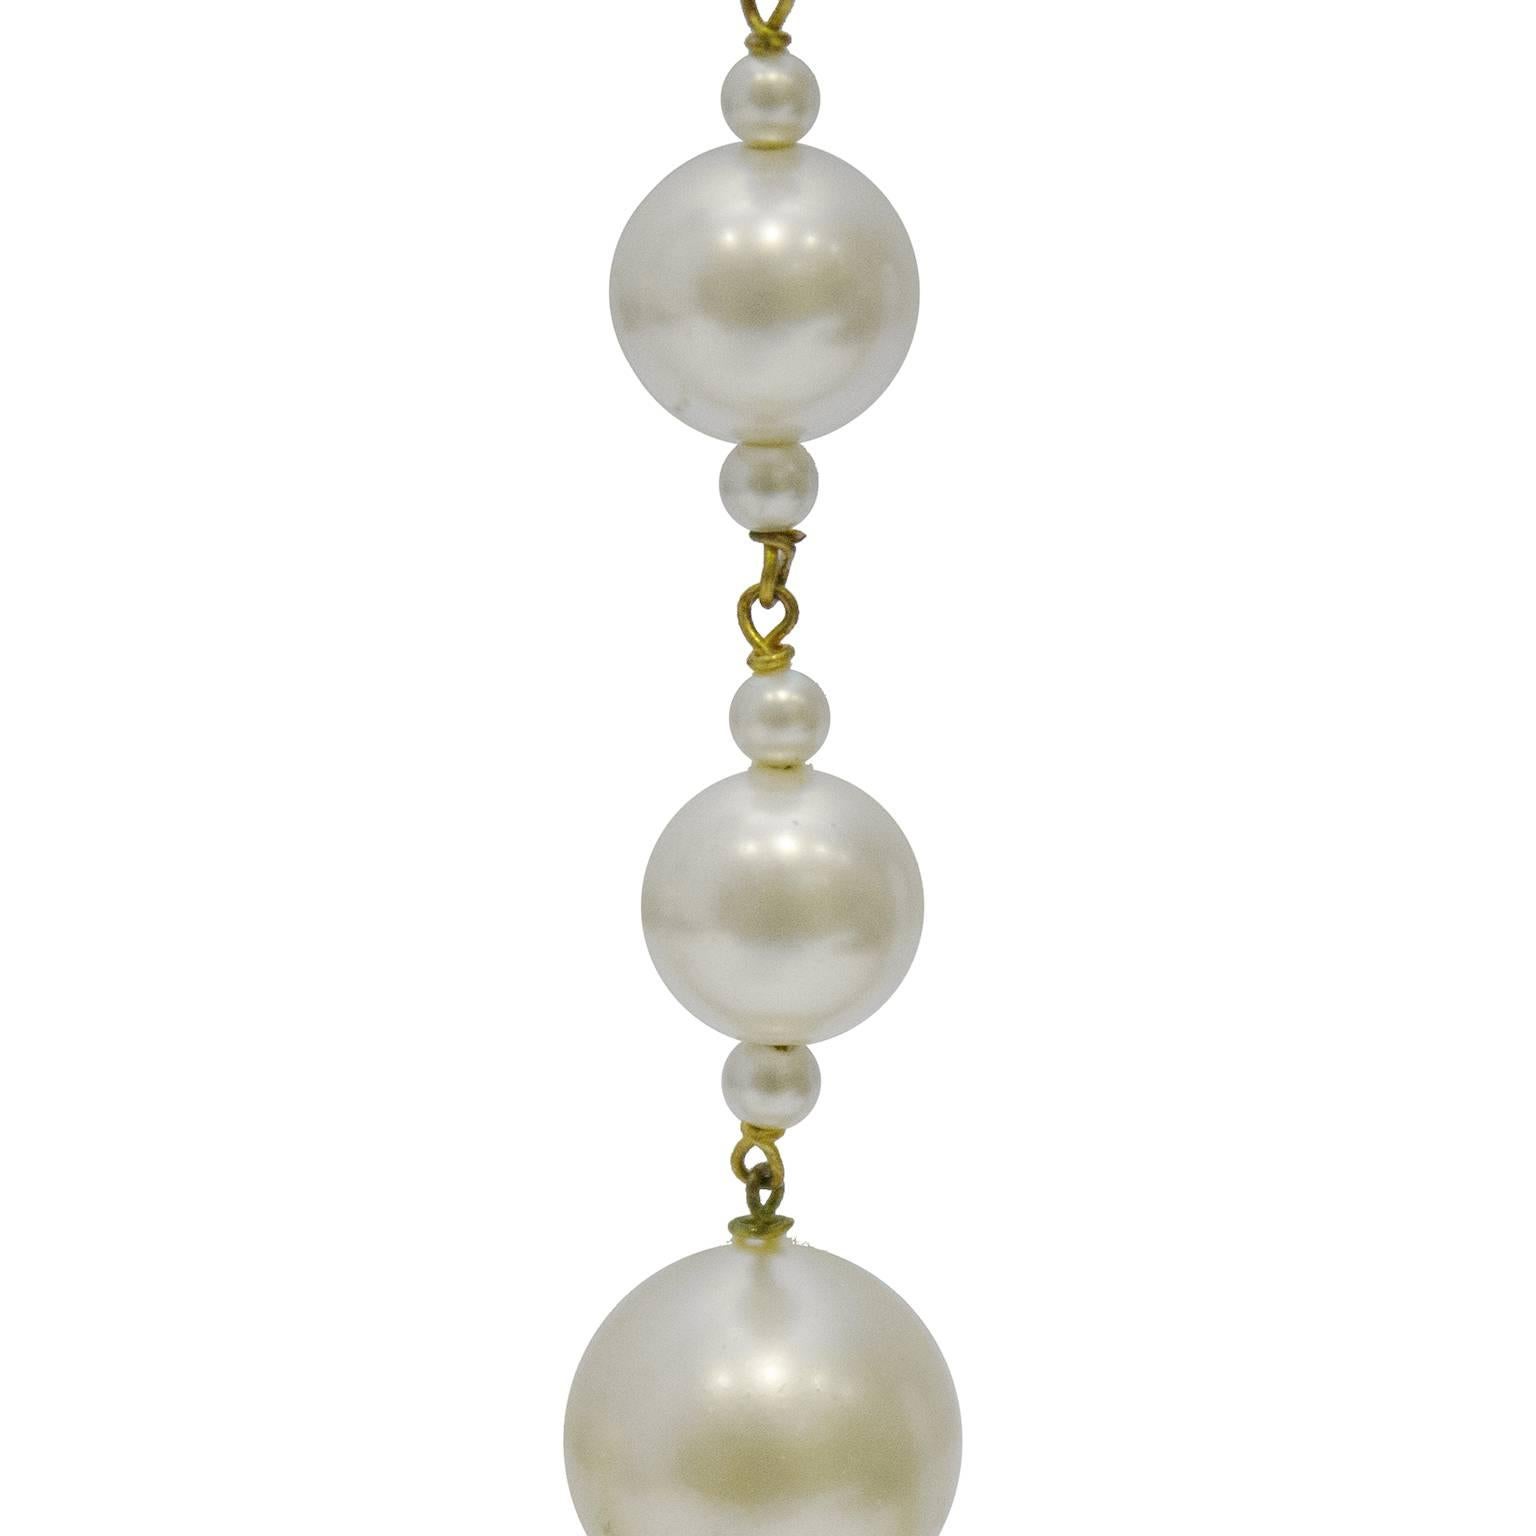 Chanel multi pearl drop earrings from the 1980's. The clip on style earrings are made of 5 large sized faux pearls with six tiny pearls and goldtone links. In excellent condition. 